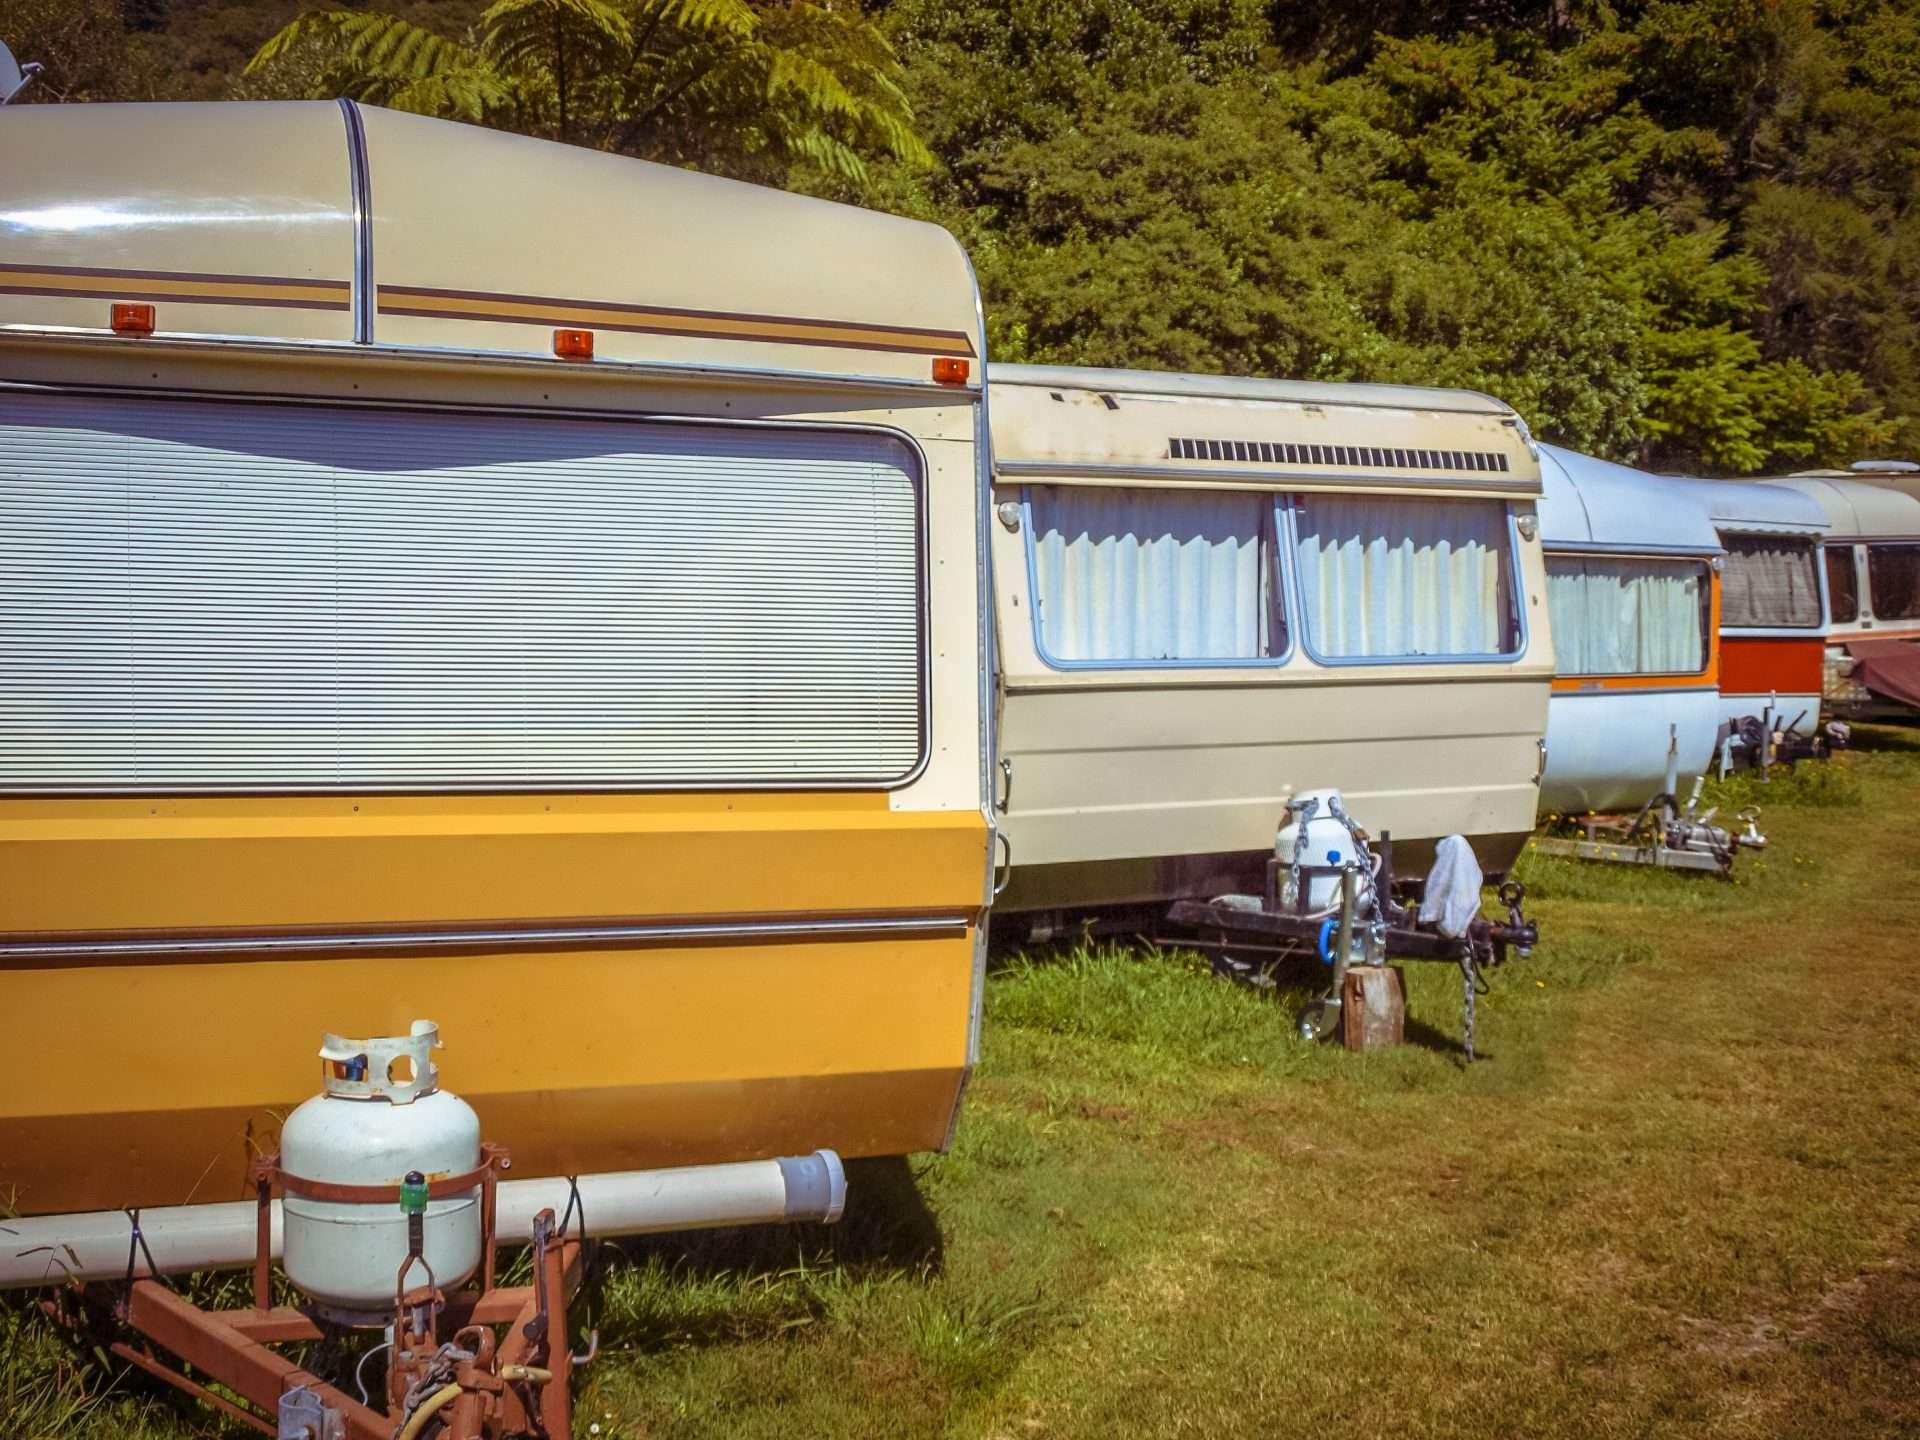 Vintage motorhomes lined up on grass